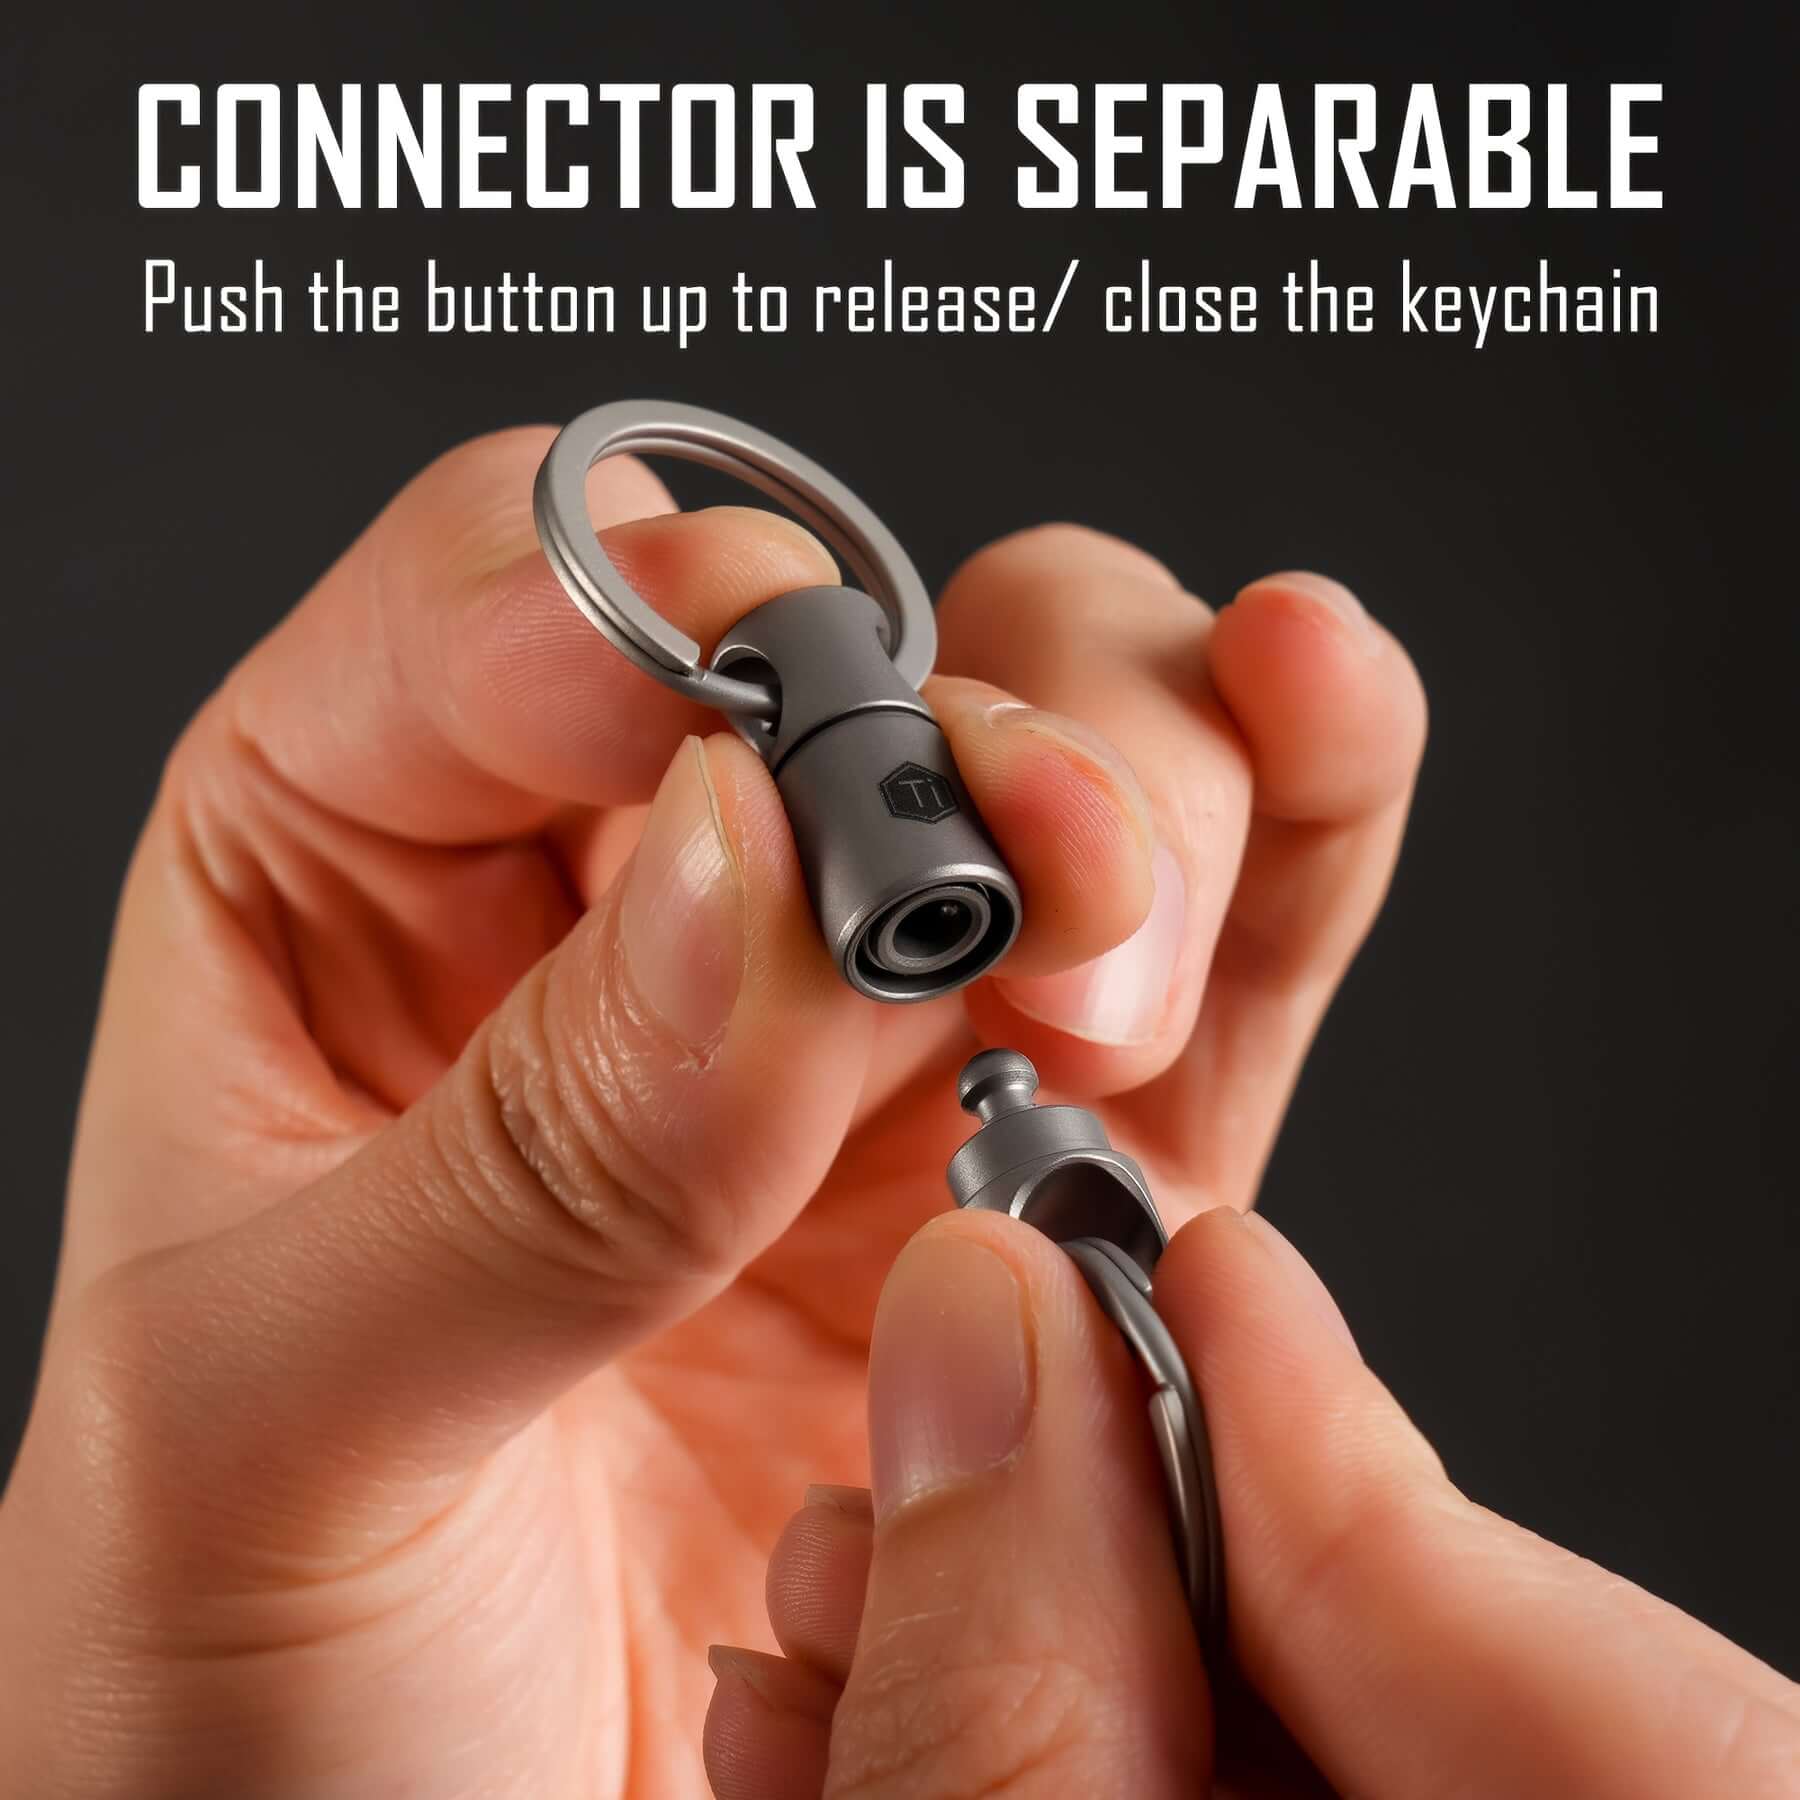 KeyRing 360™ Magnetic Quick Connector